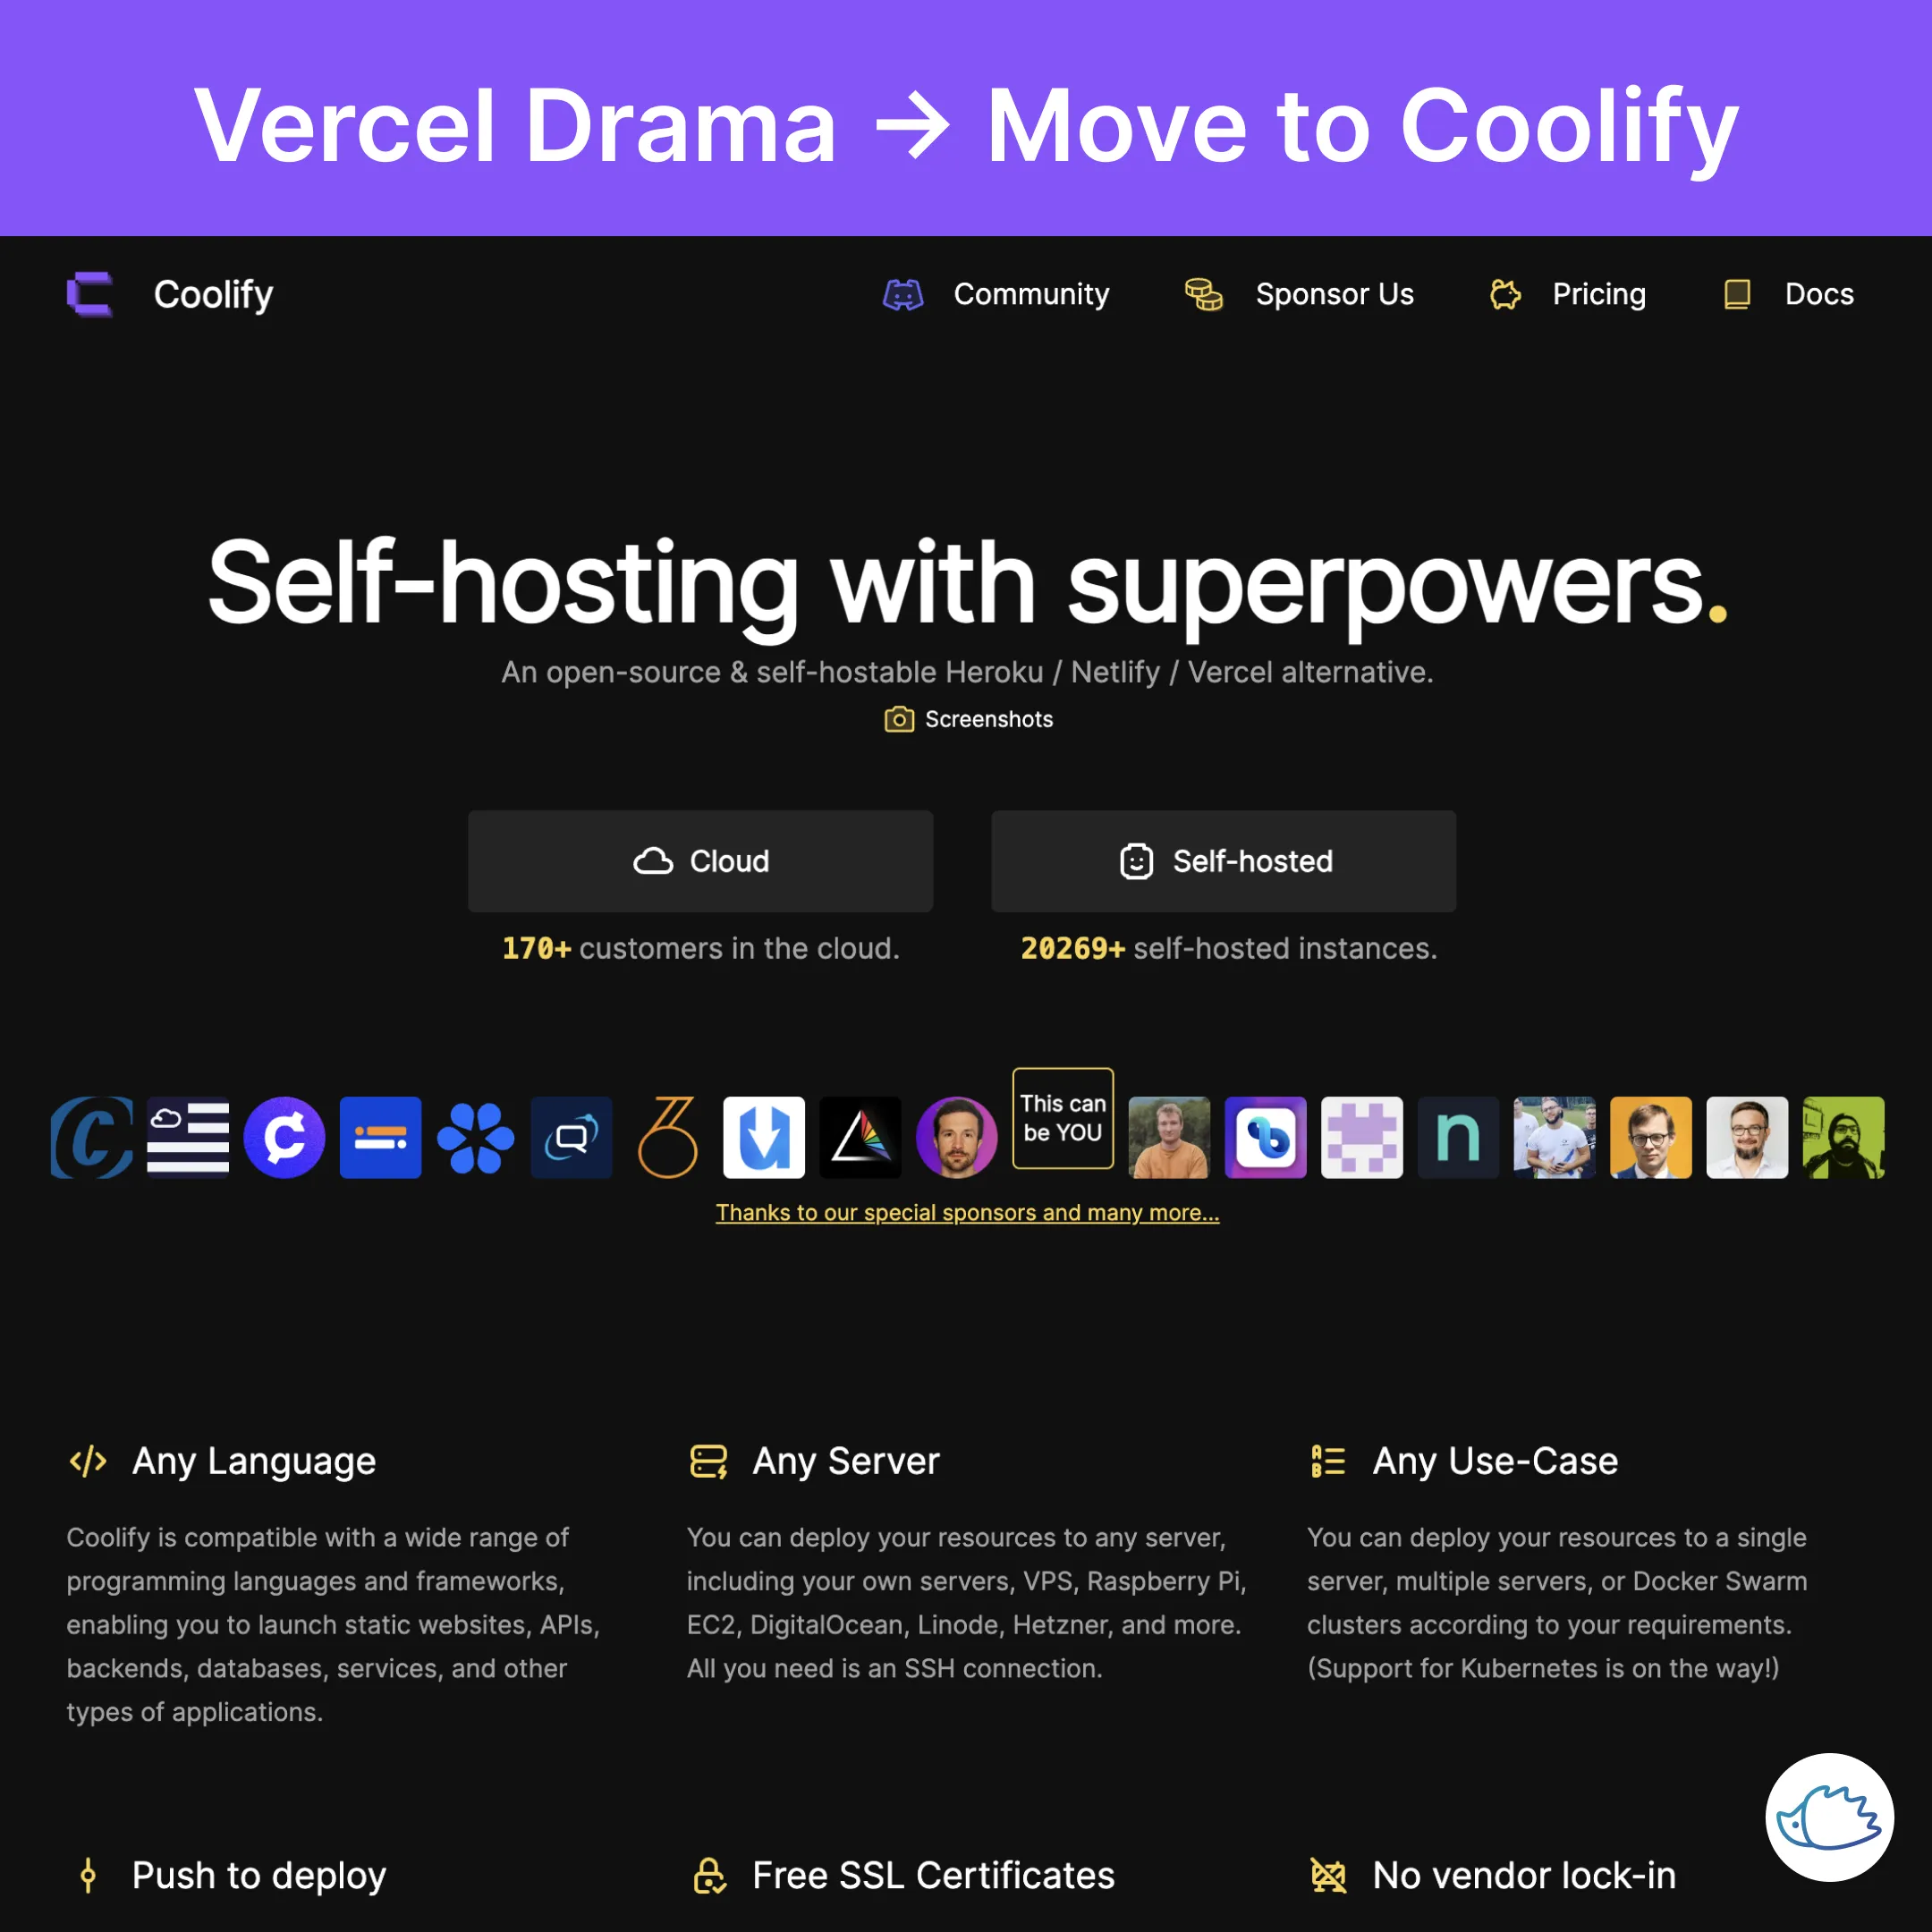 Vercel Drama → Move to Coolify